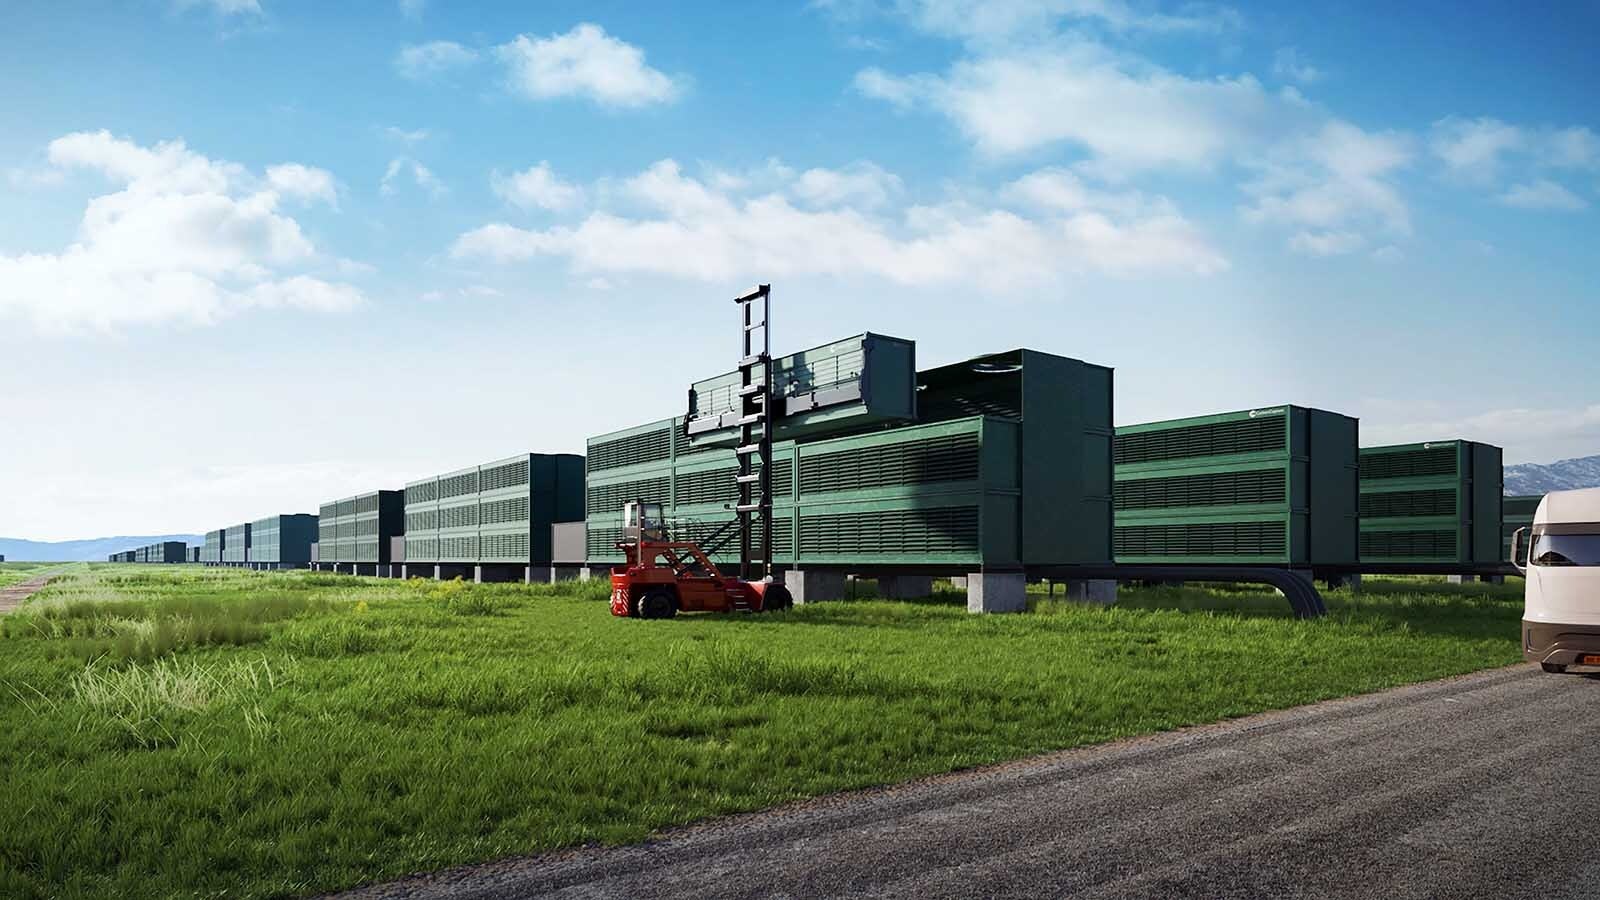 Artist’s rendering of the Project Bison direct air capture facility to be located near Sweetwater, Wyoming. A truck is shown delivering a container-sized direct-air capture module.